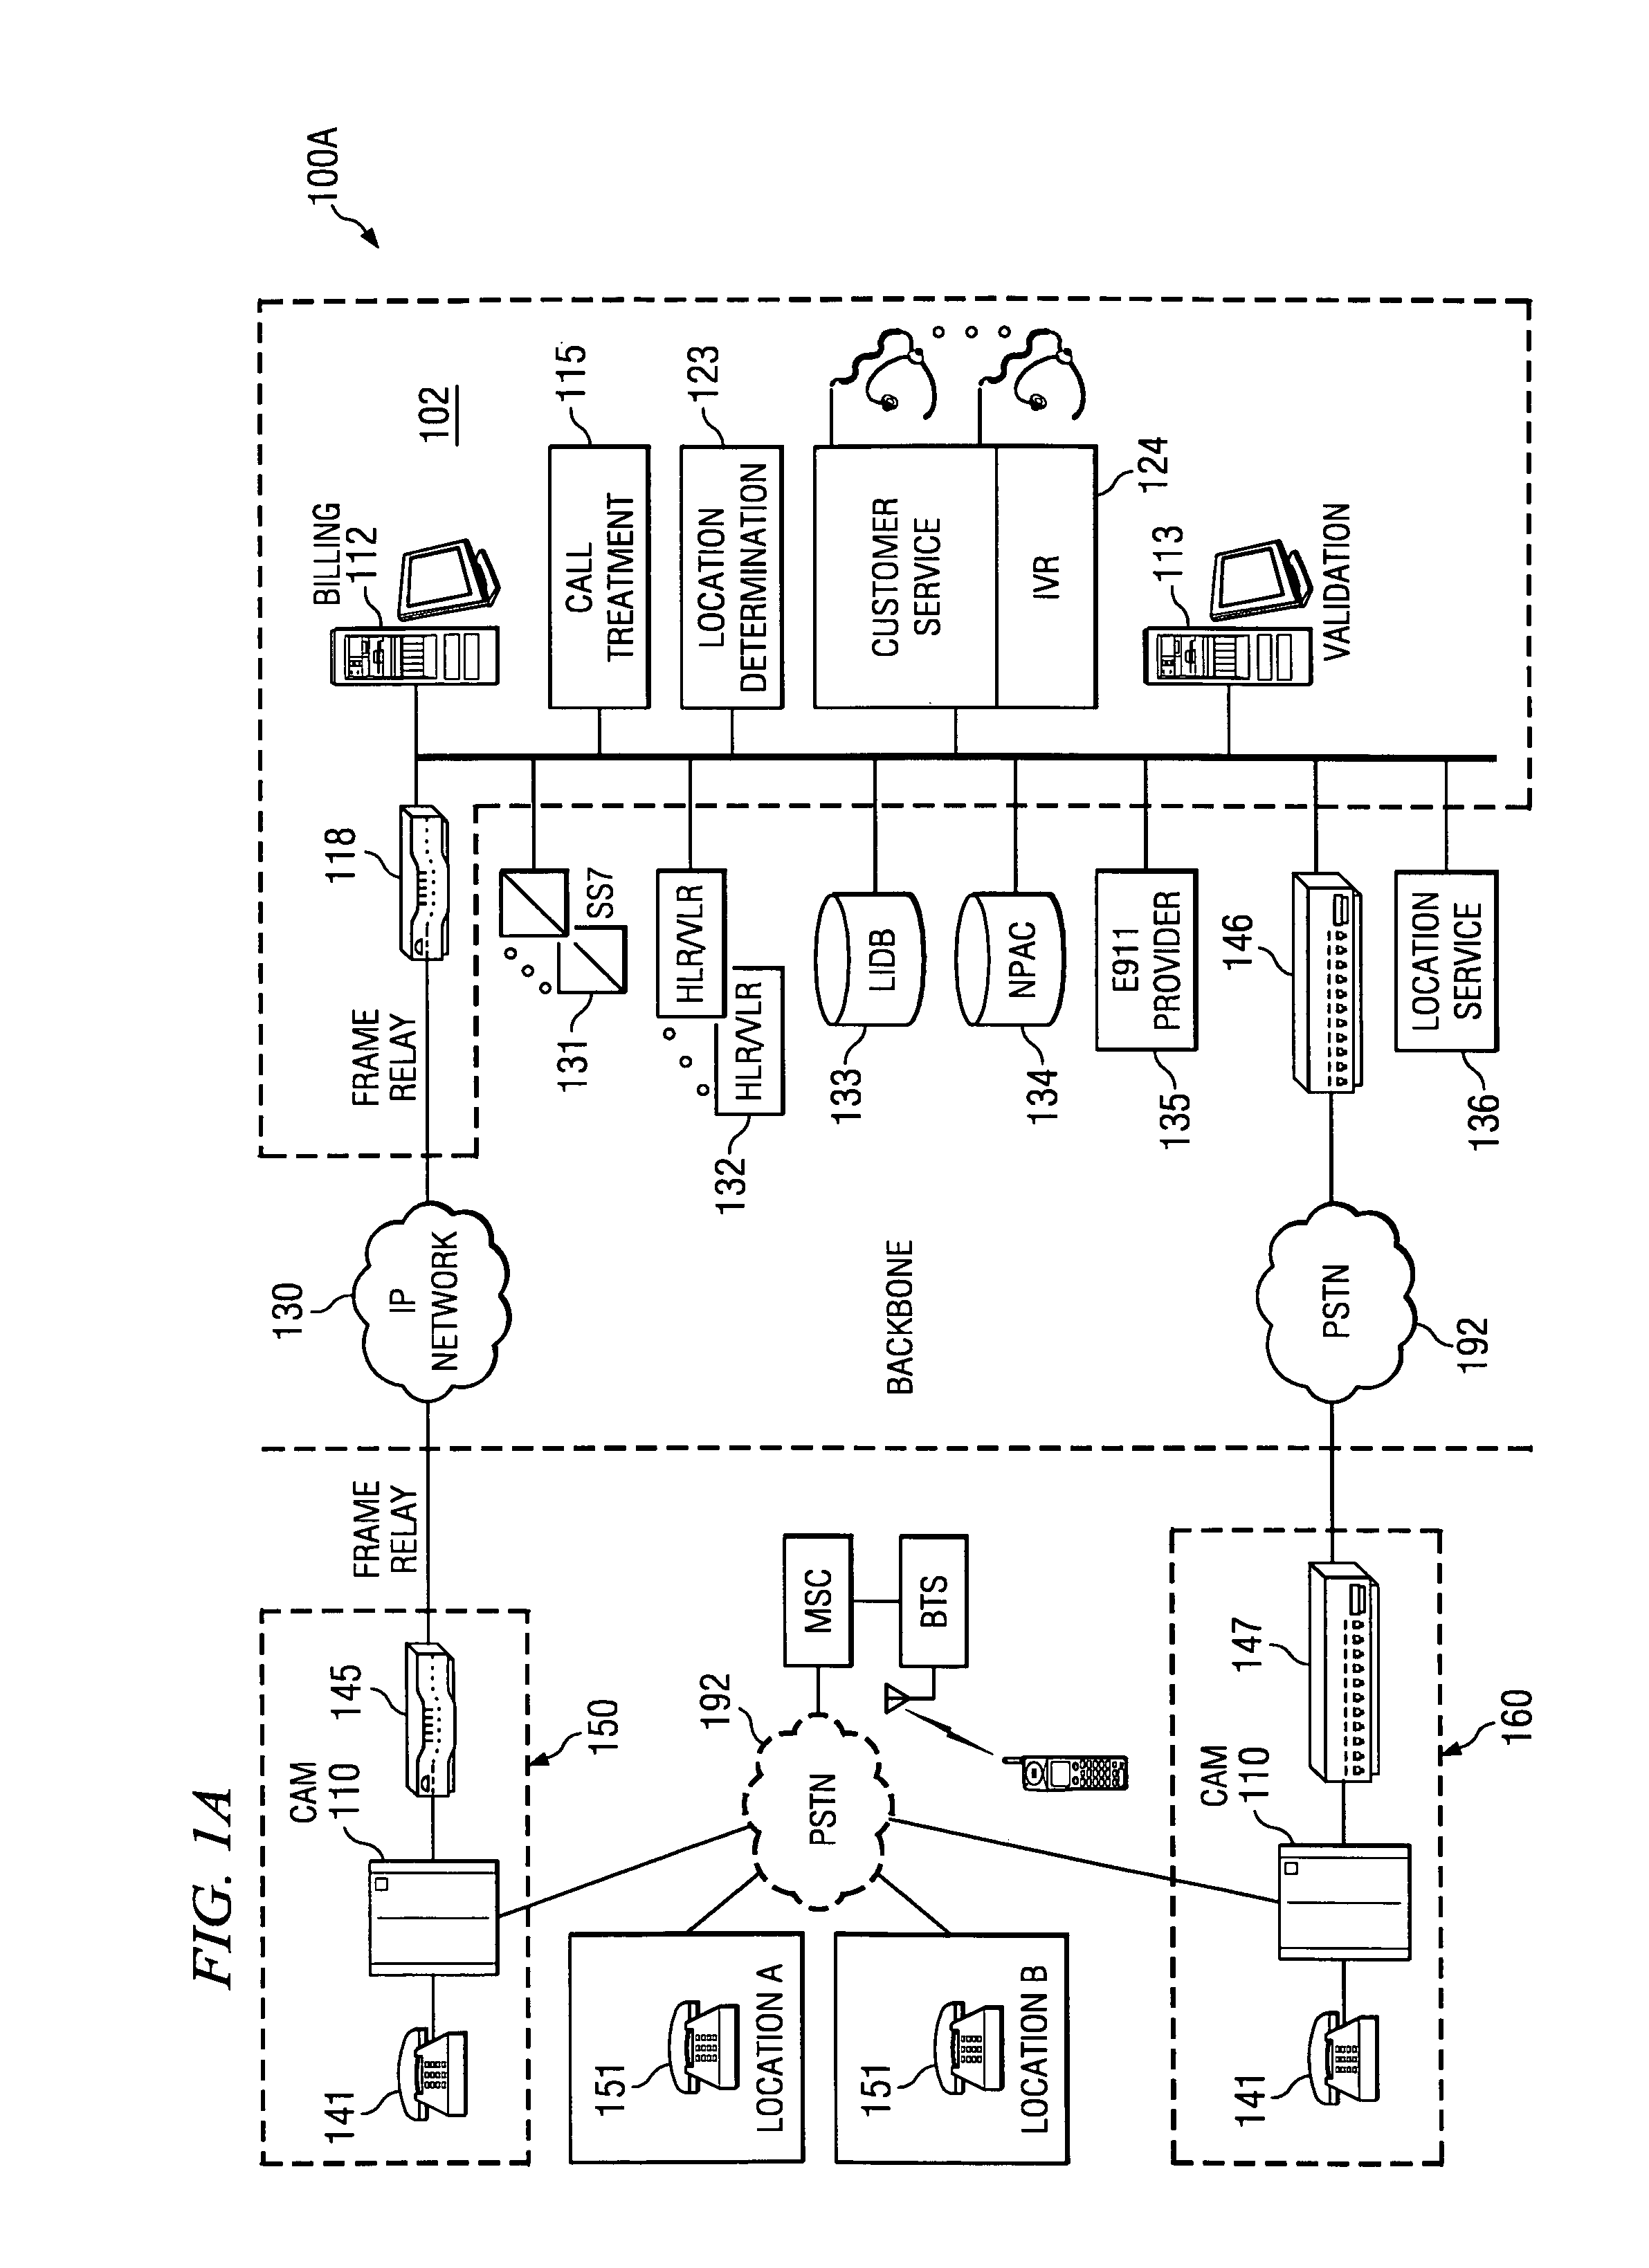 Systems and methods for processing calls directed to telephones having a portable interface